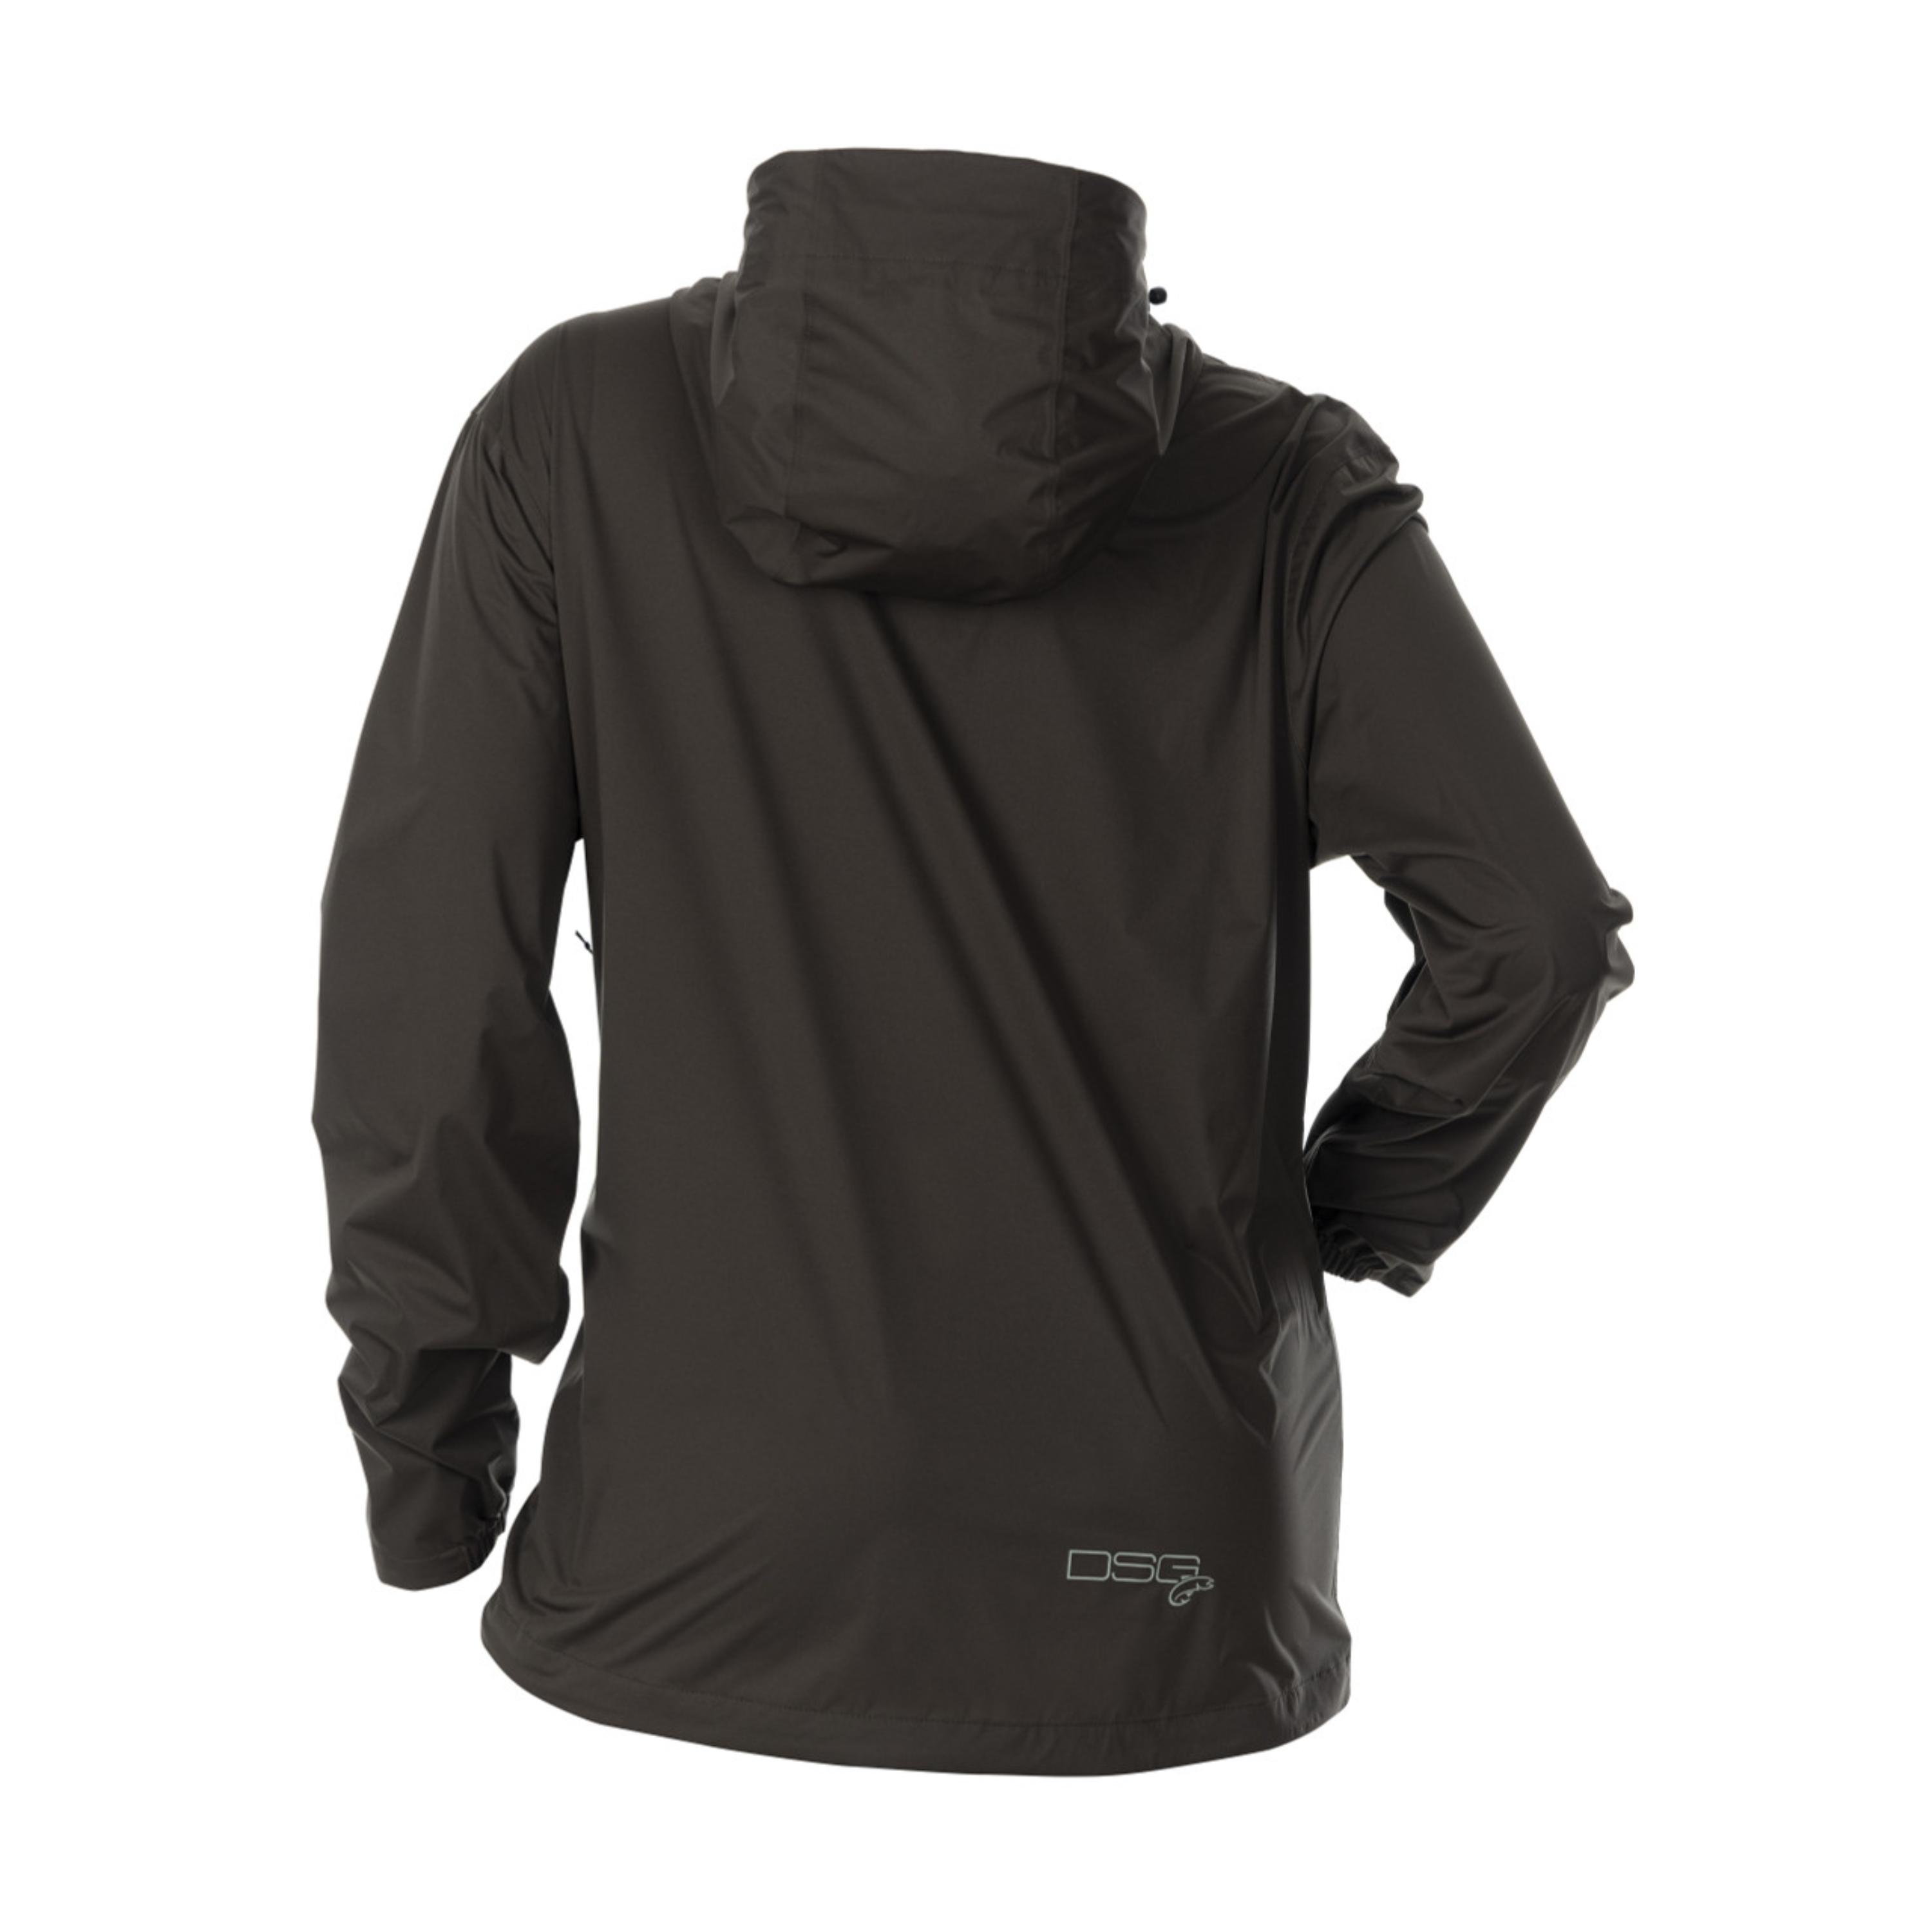 DSG Outerwear Gift Guides - DSG Outerwear